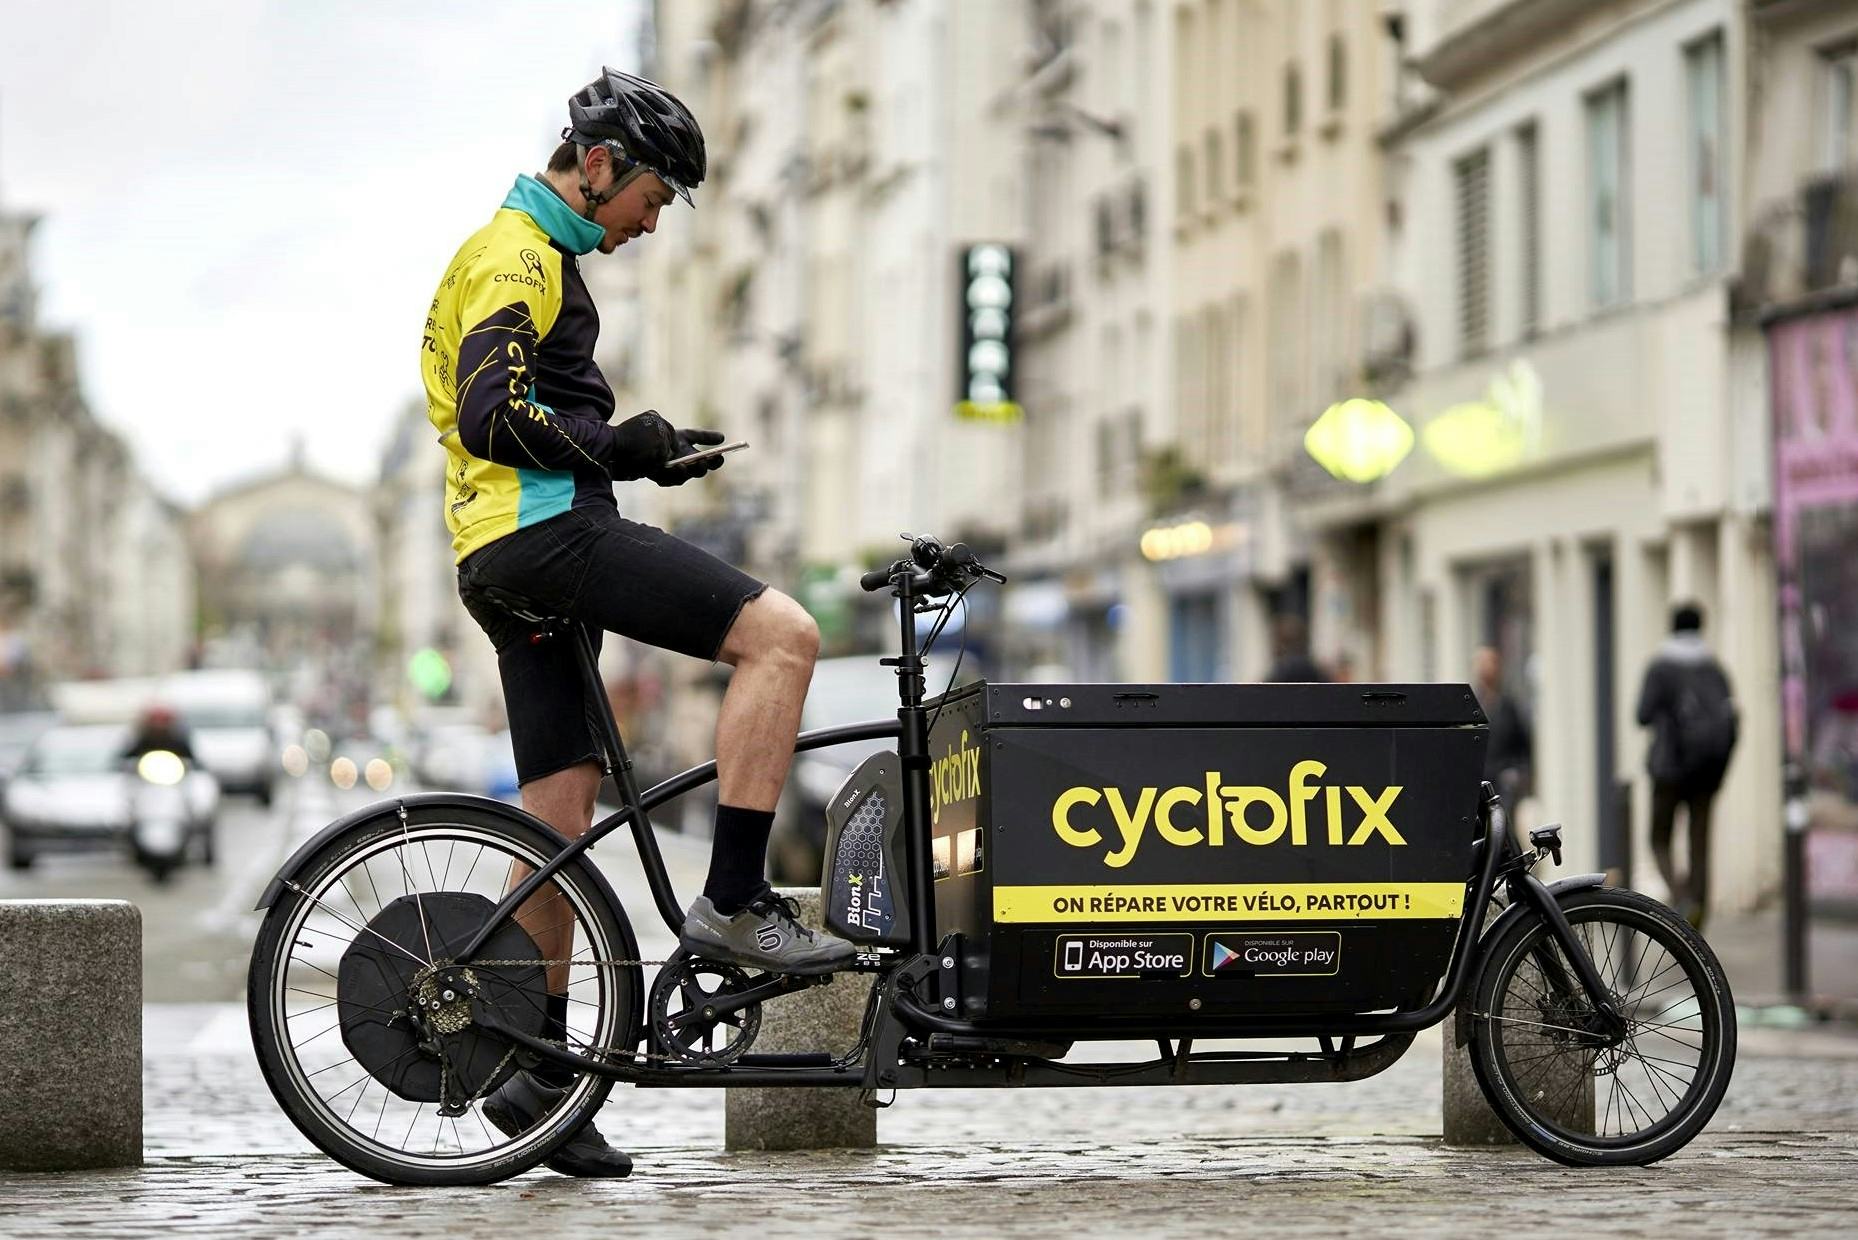 Created in 2016, Cyclofix has repaired more than 300,000 bikes in France. Now, the company wants to offer its services in Europe. - Photo Michel de Chavanon